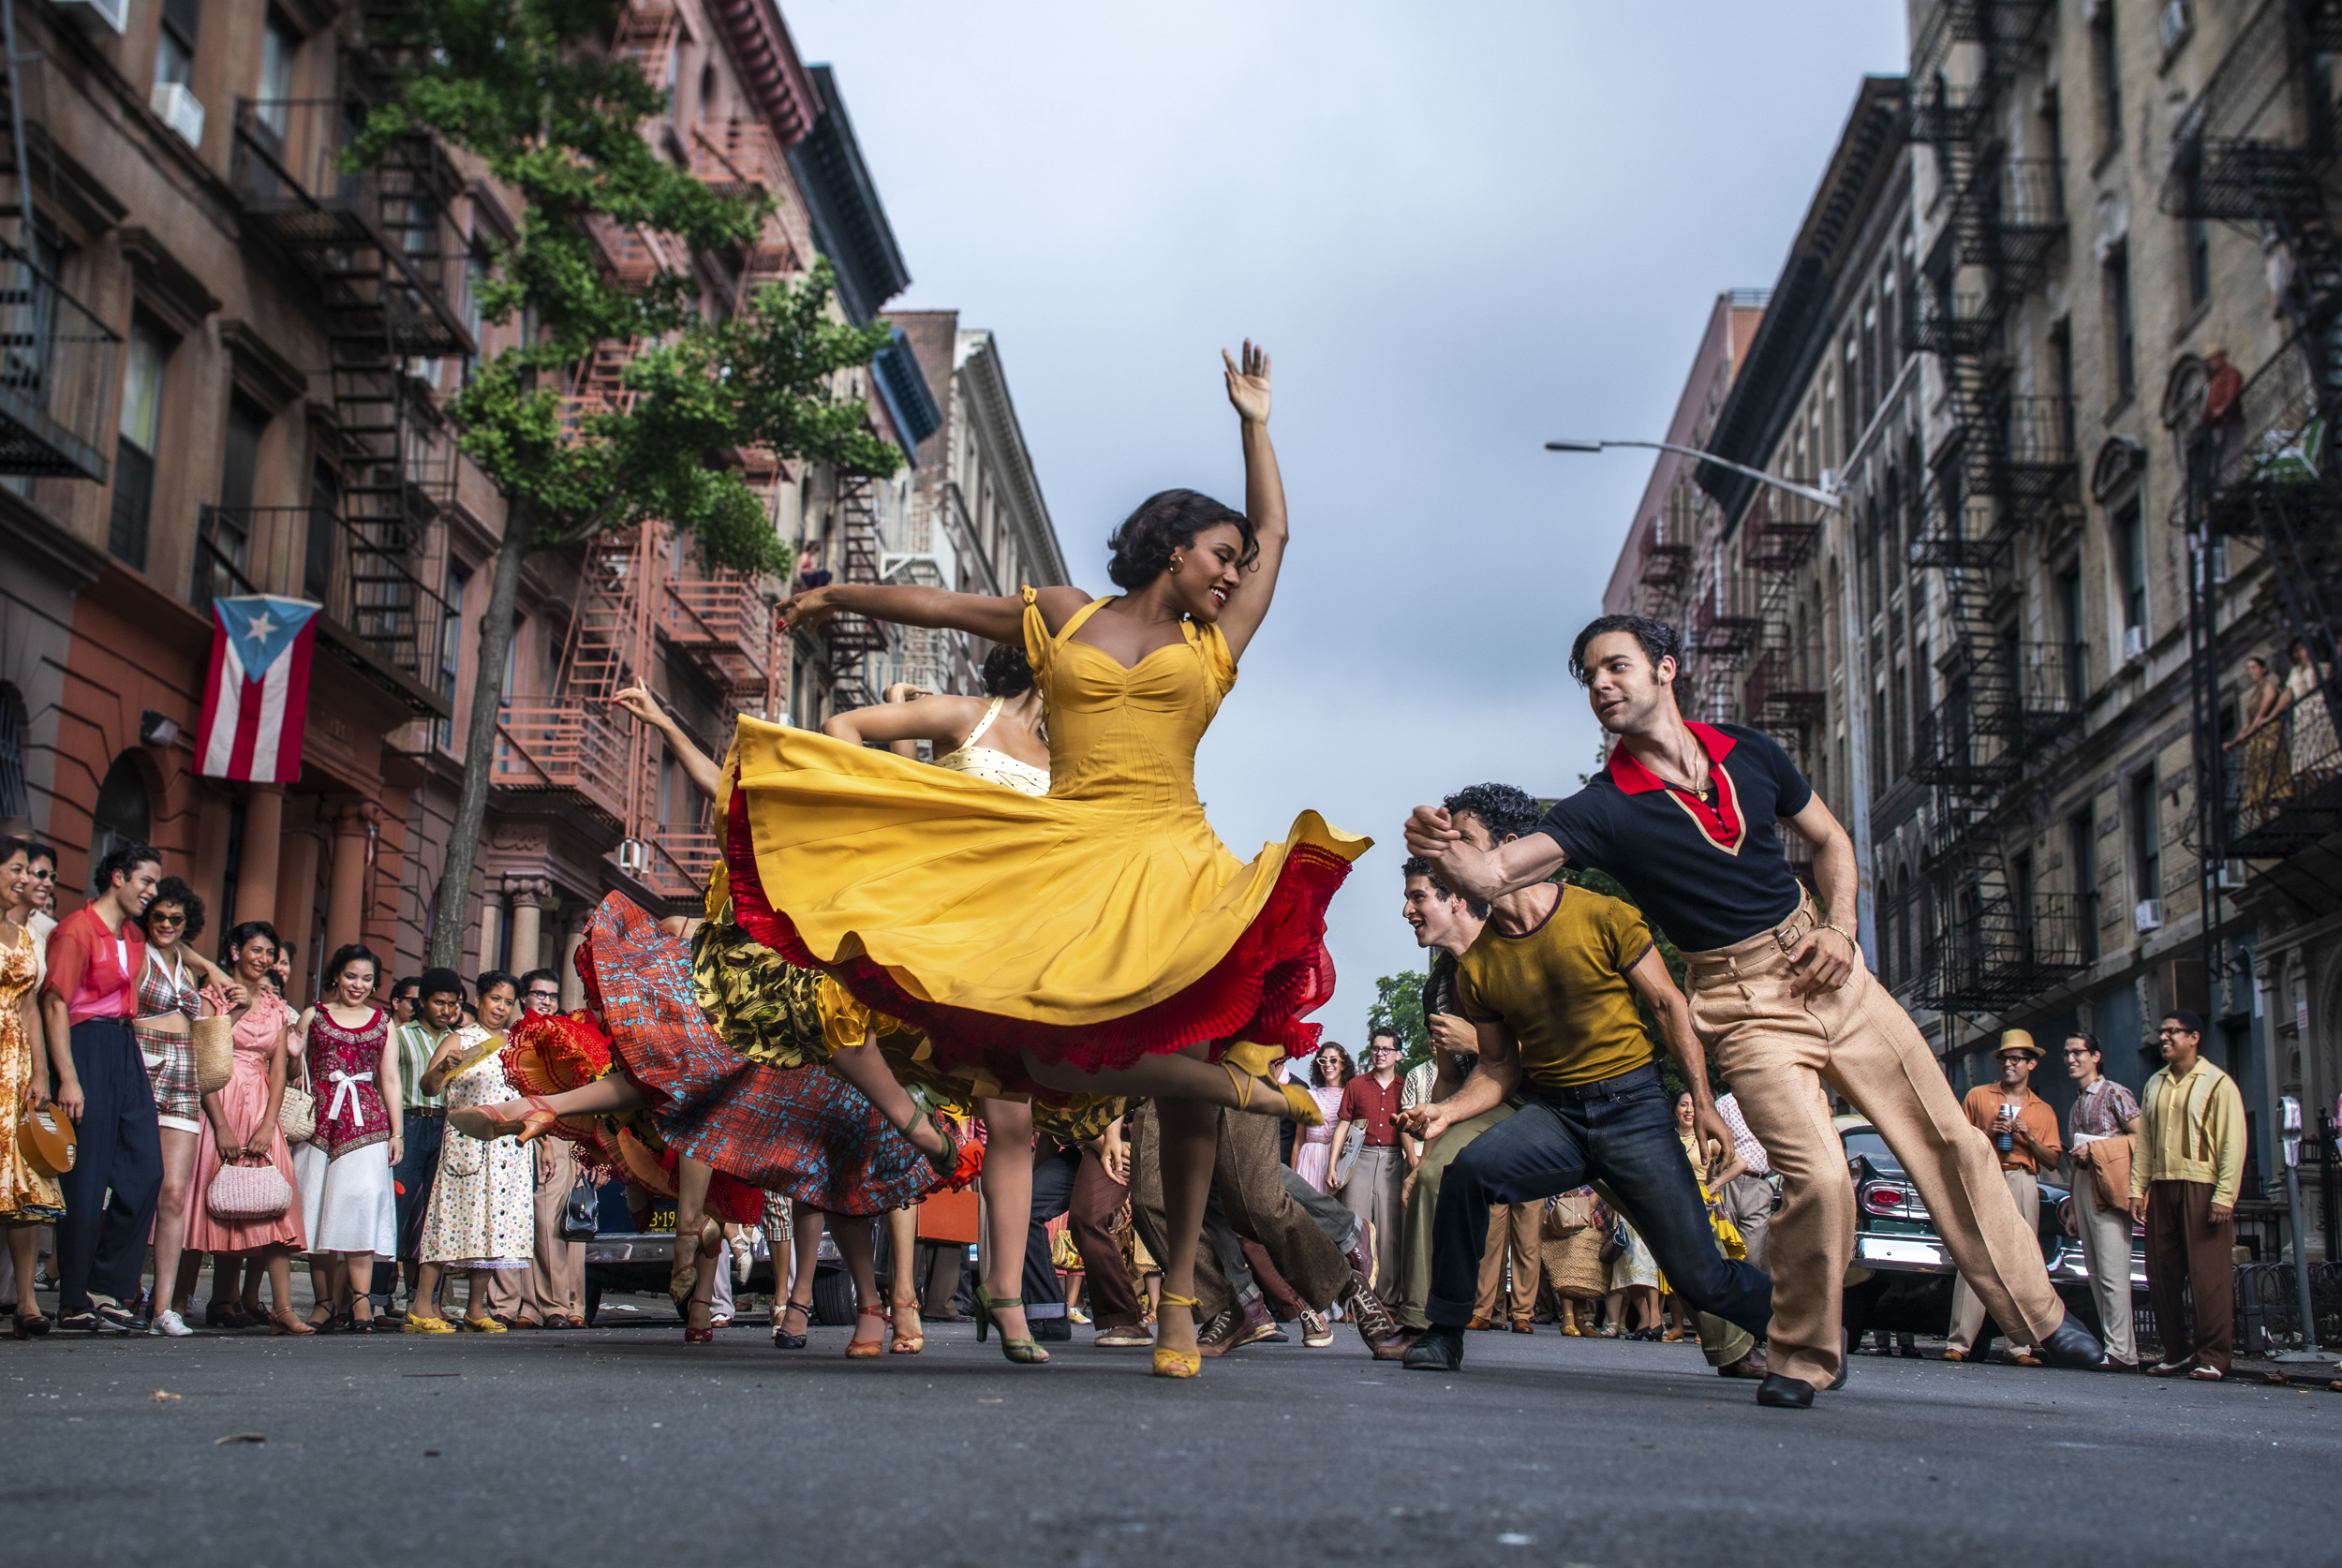 "West Side Story" tops North American box office in opening weekend